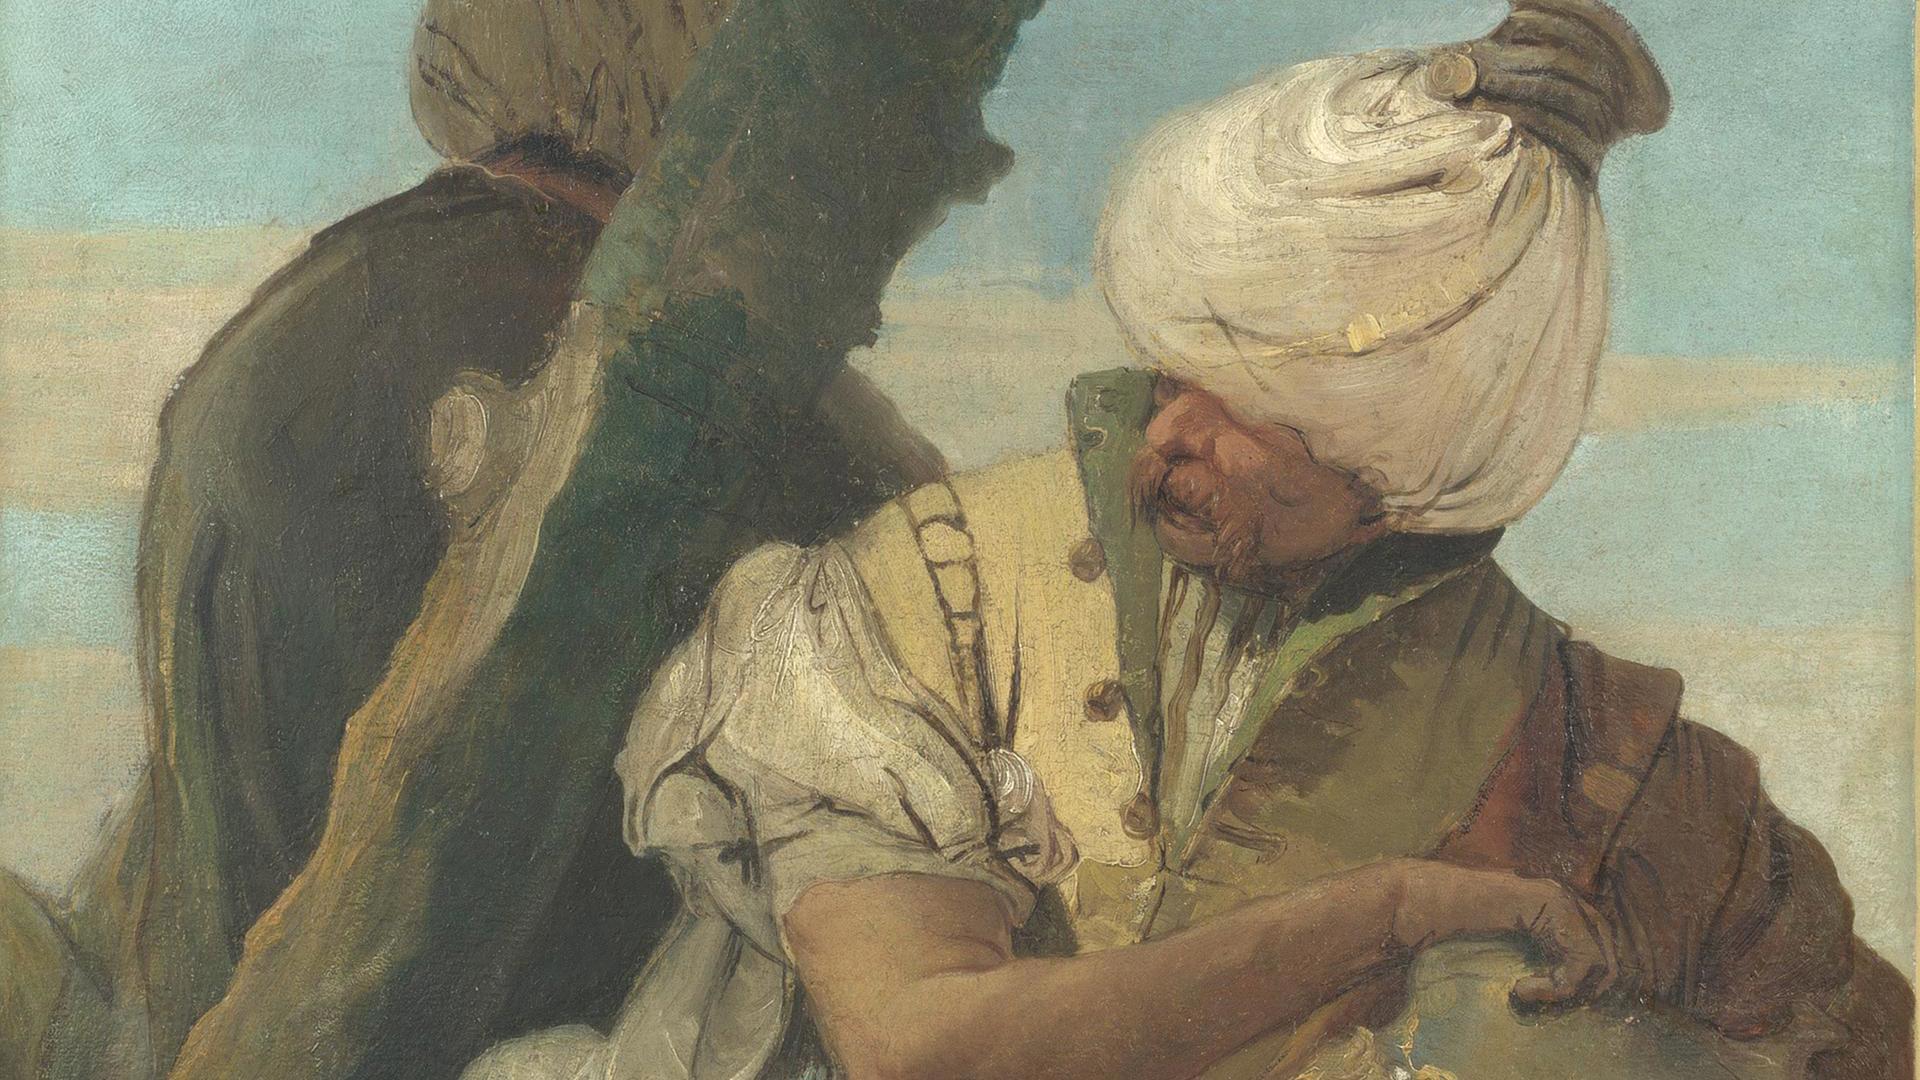 Two Orientals seated under a Tree by Giovanni Battista Tiepolo